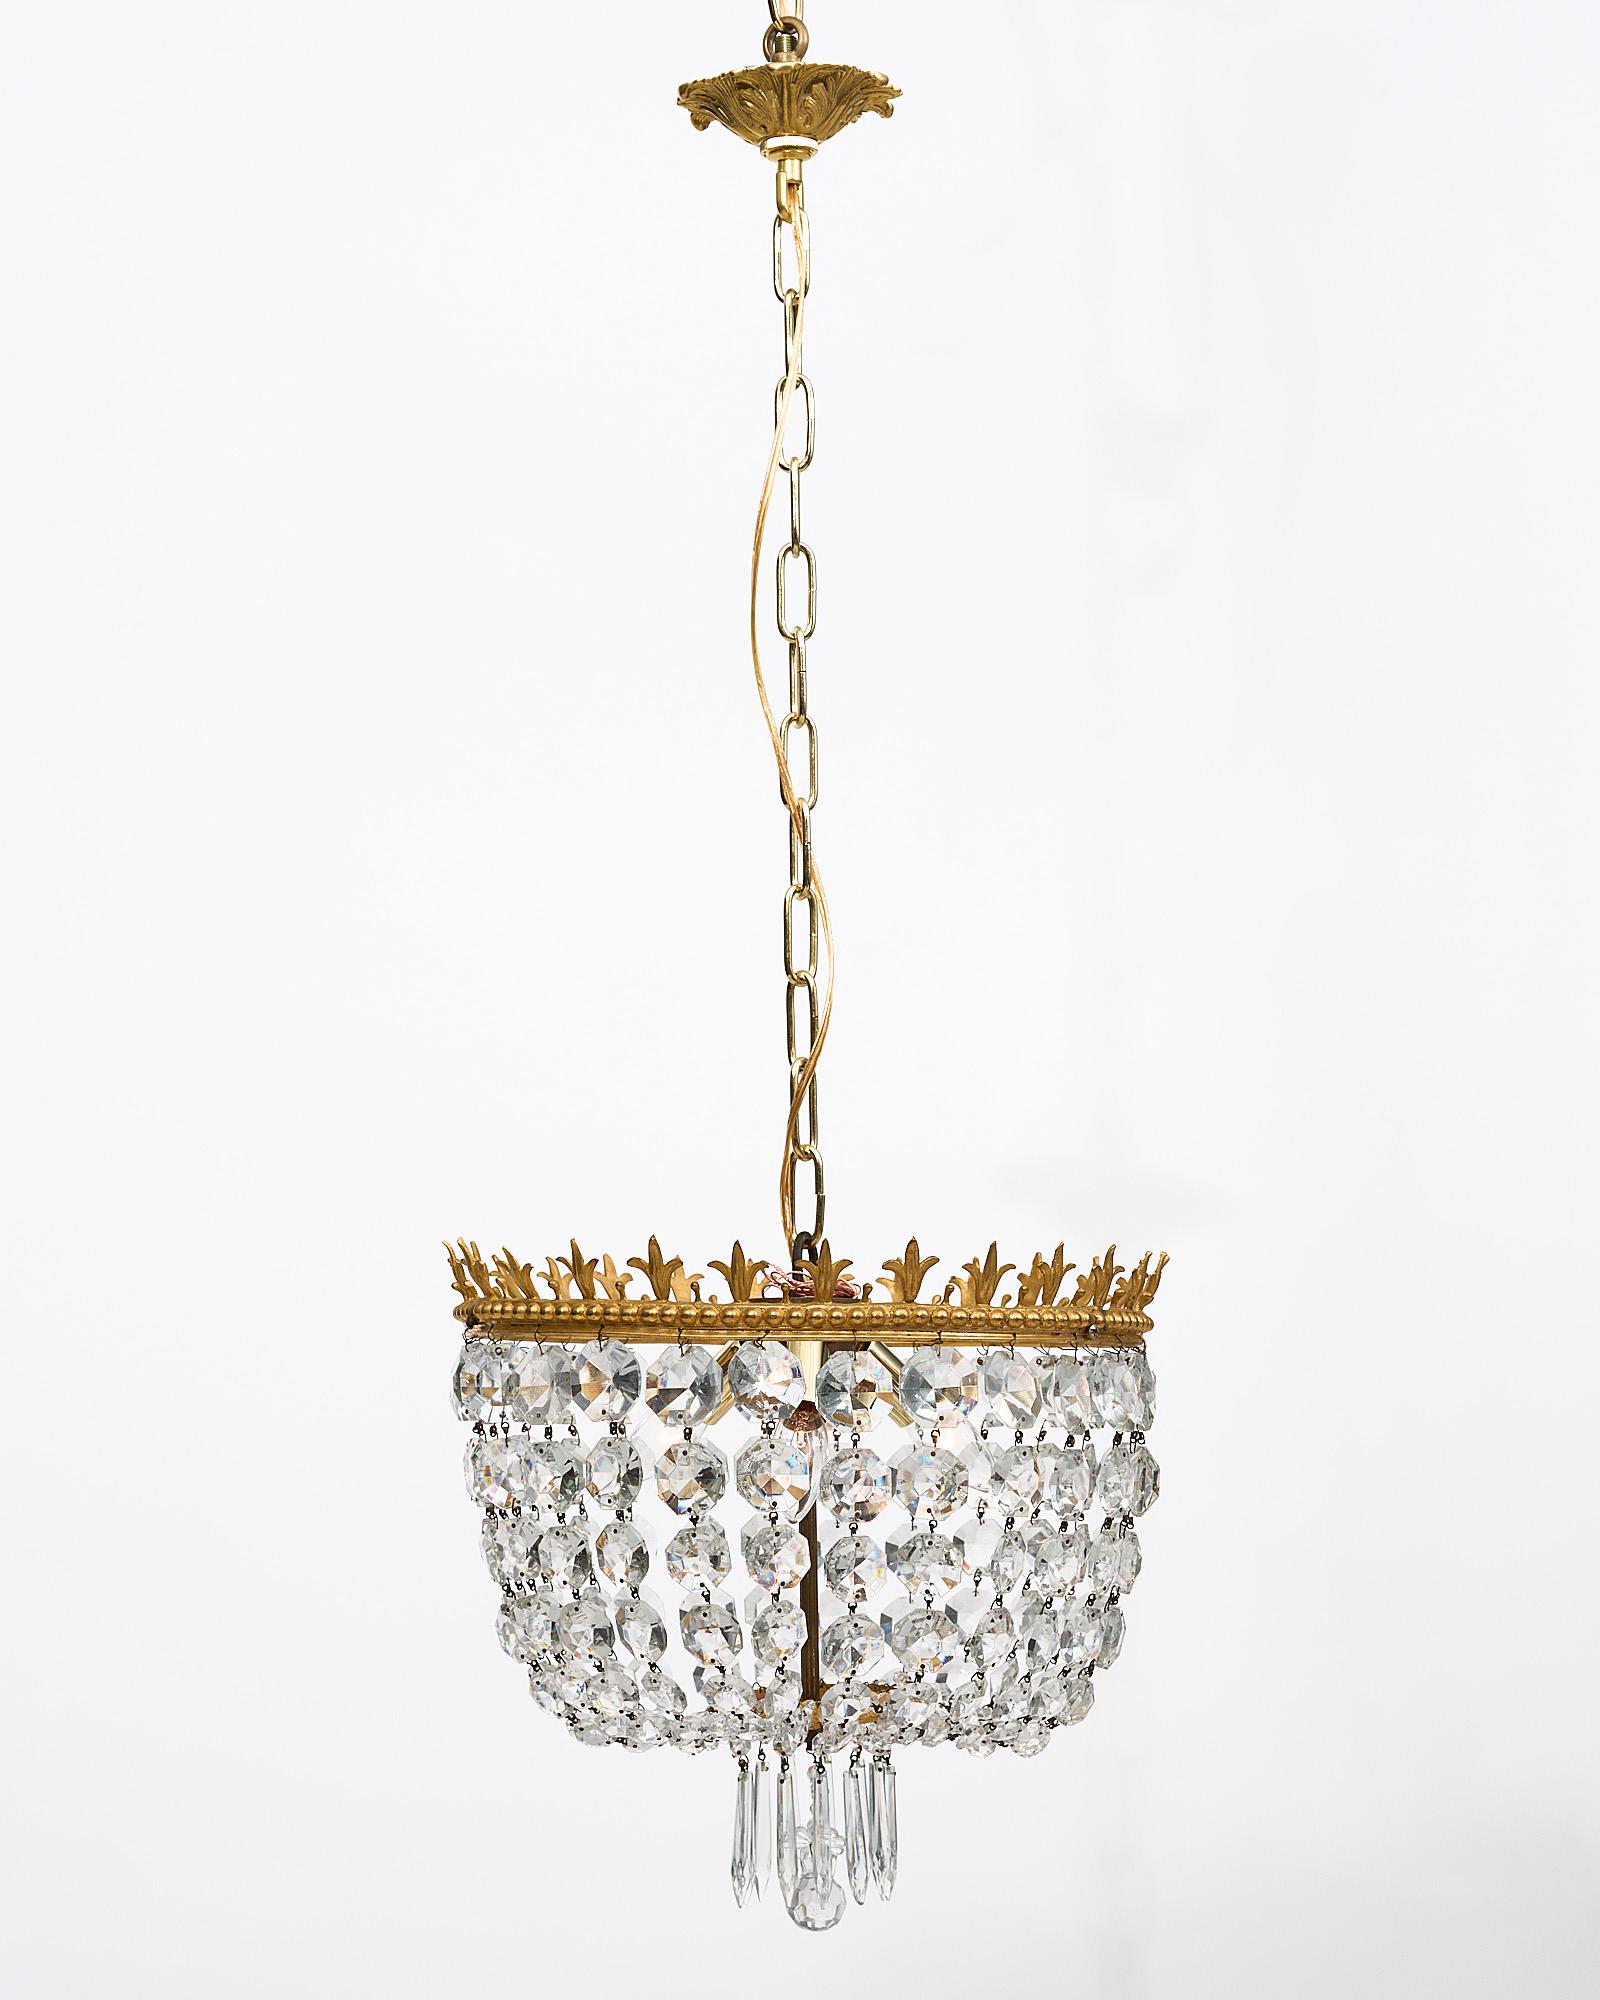 Pair of French antique crystal chandeliers. Finely gilded brass structures with a fleur-de-lys crown. Cut crystal “Cabochons” and pendants. They are newly wired to fit US standards and the current overall height from ceiling is 38.25